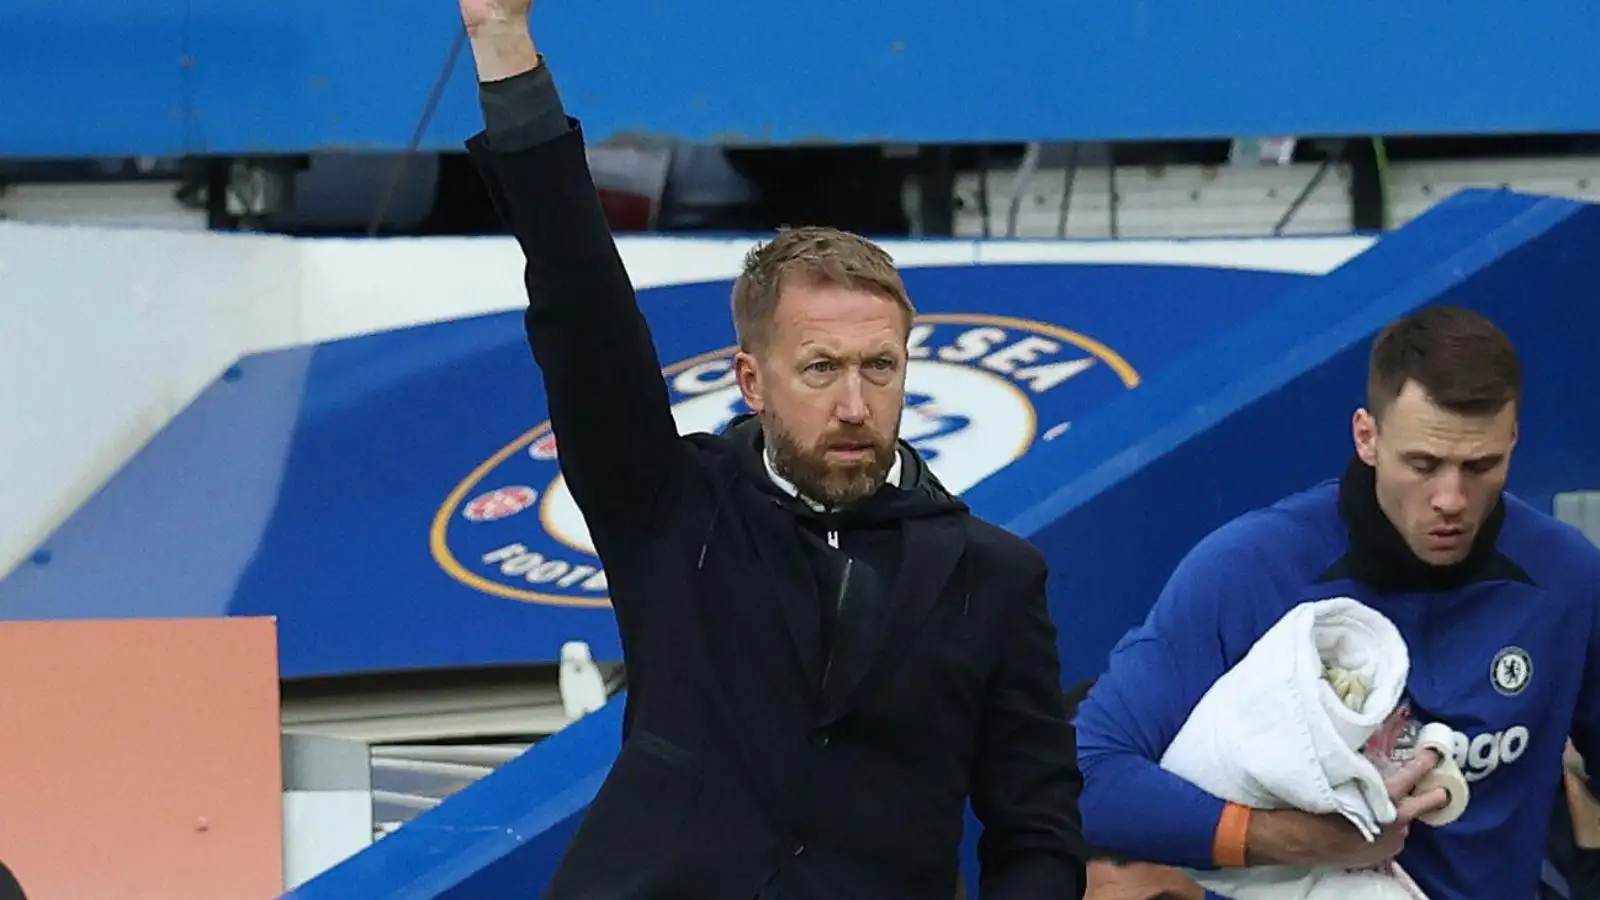 Chelsea boss Graham Potter puts his arm in the air